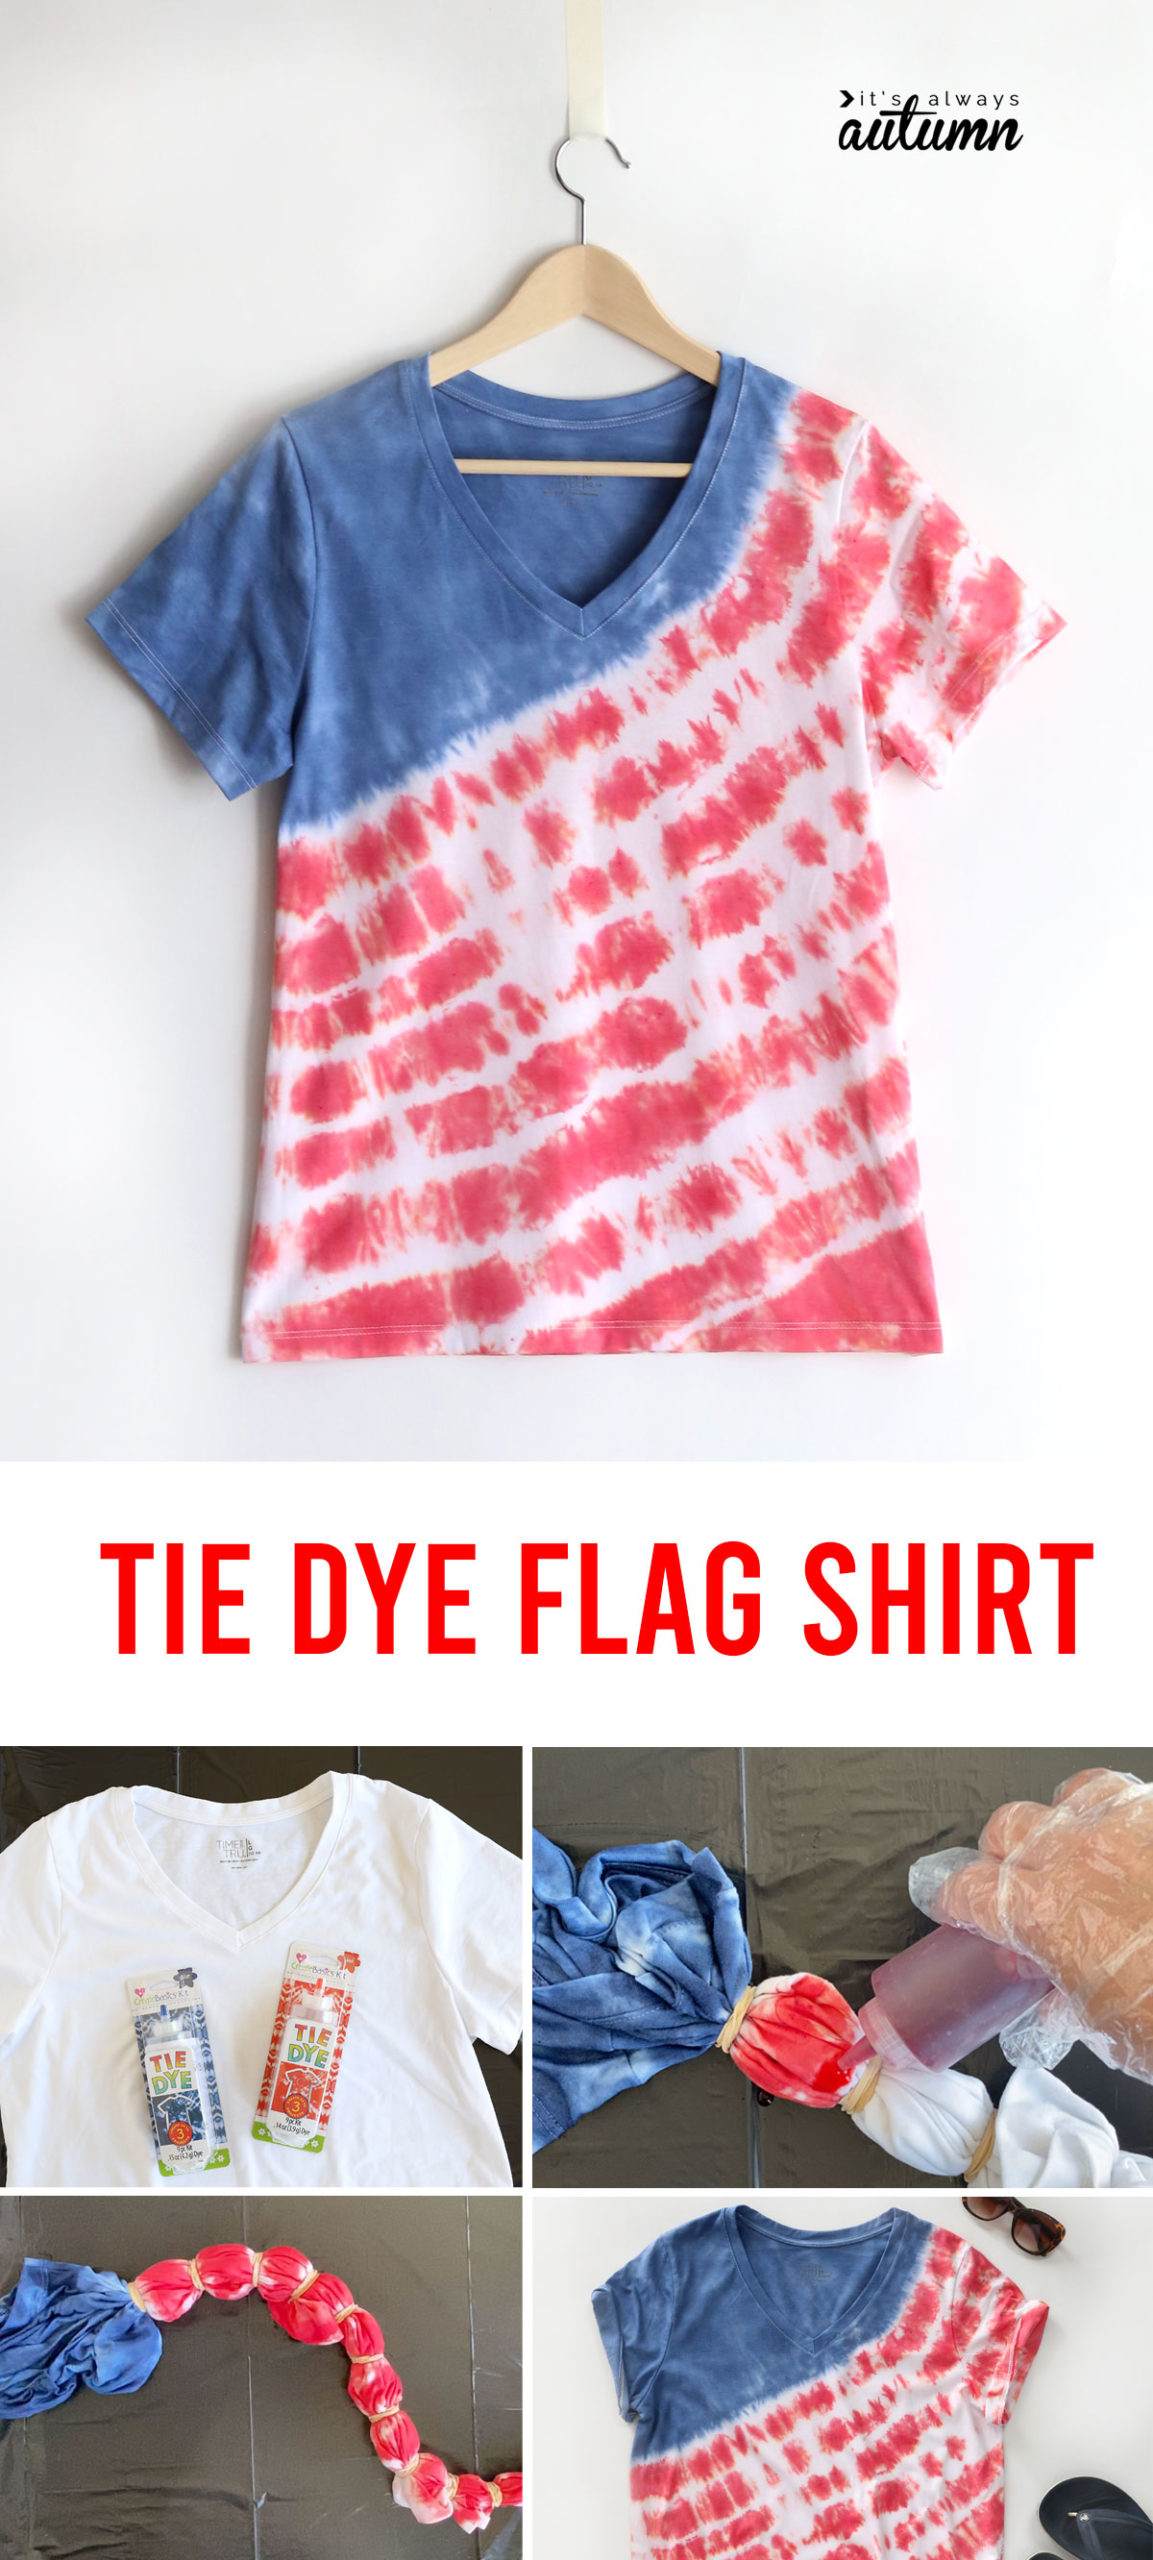 How to make a red white and blue tie dye flag shirt